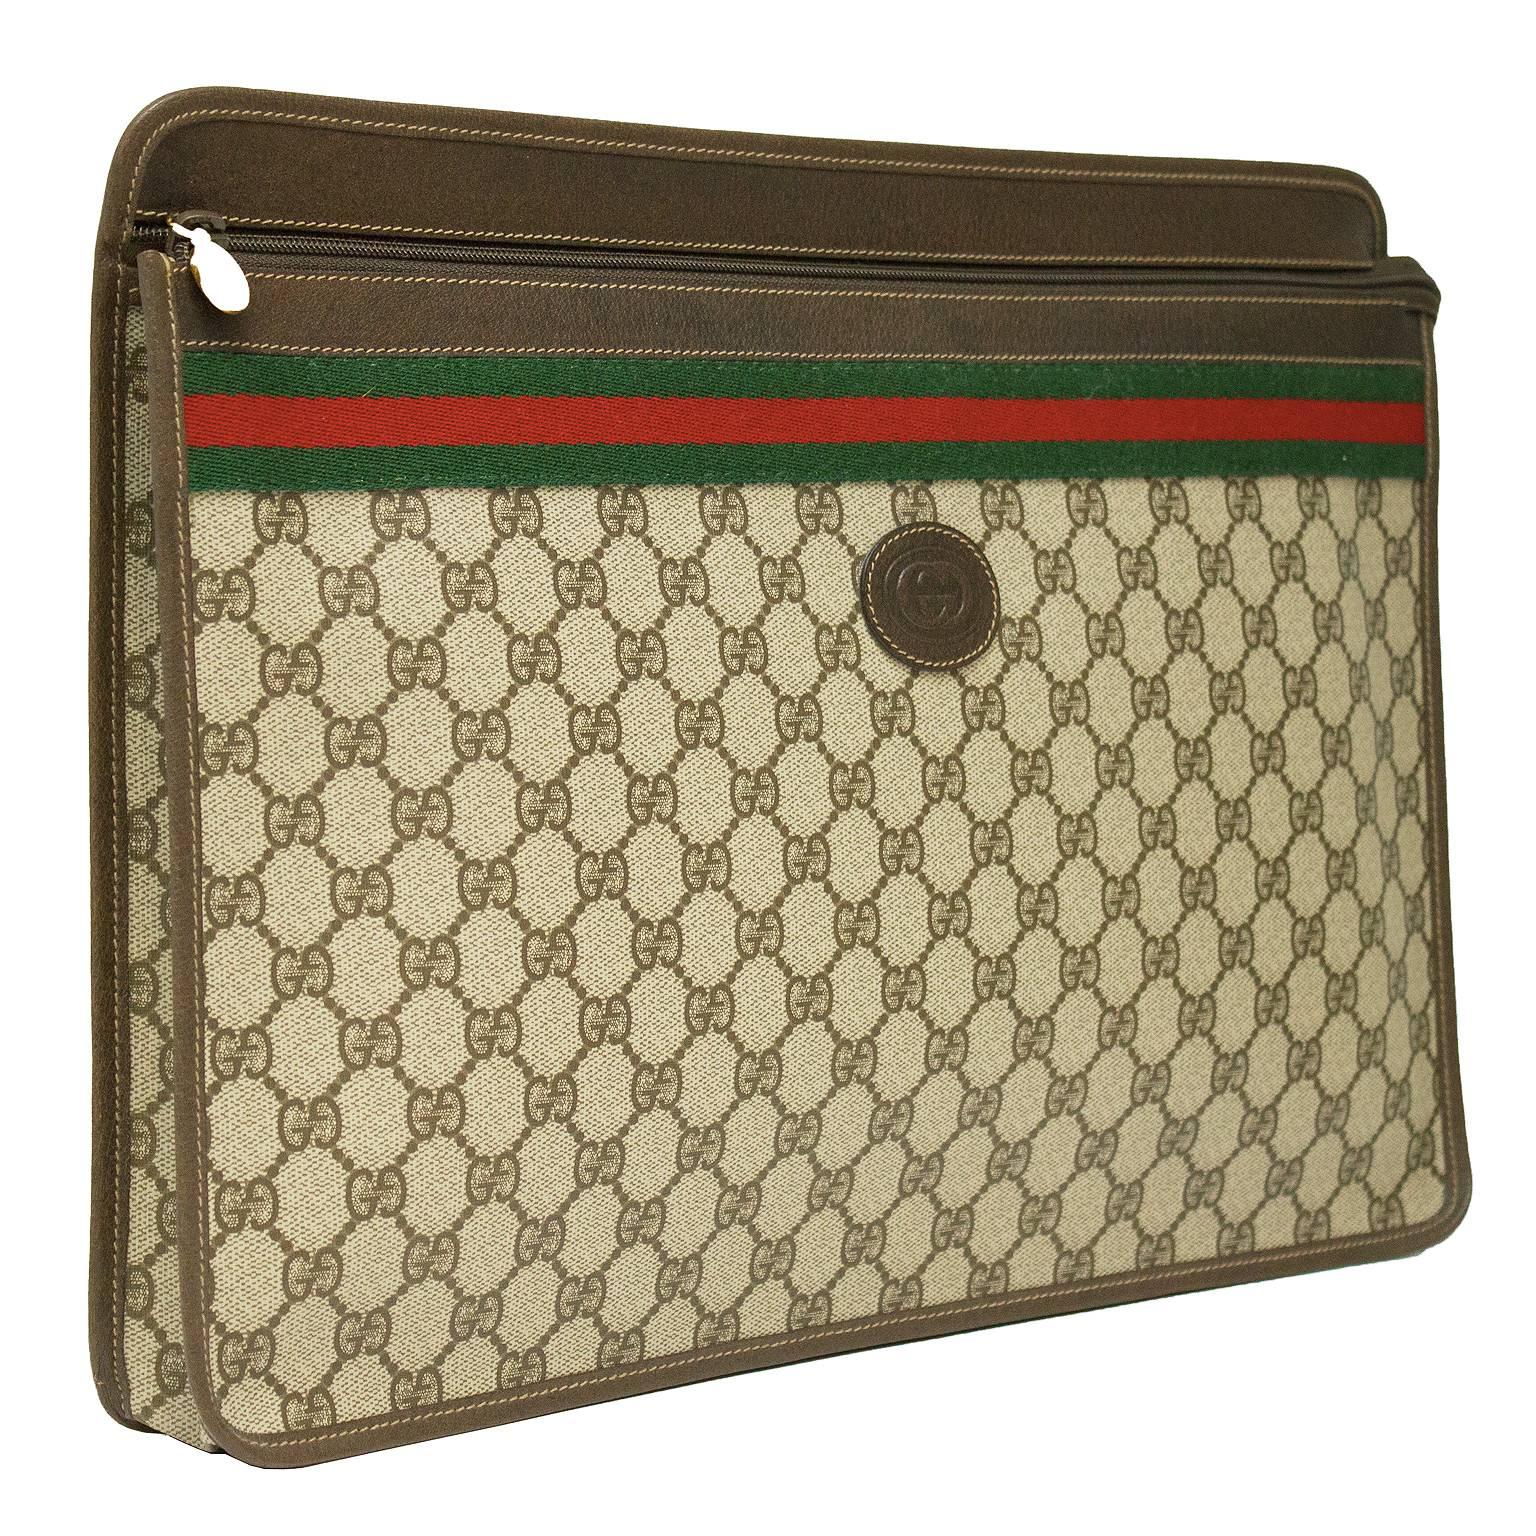 Pristine 1970's Gucci vinyl treated canvas zip top portfolio. Top of the bag is framed in brown leather with the iconic Gucci red and green striped ribbon beneath. The zipper, with a gold Gucci pull tab, extends past the bag and fastens to the back